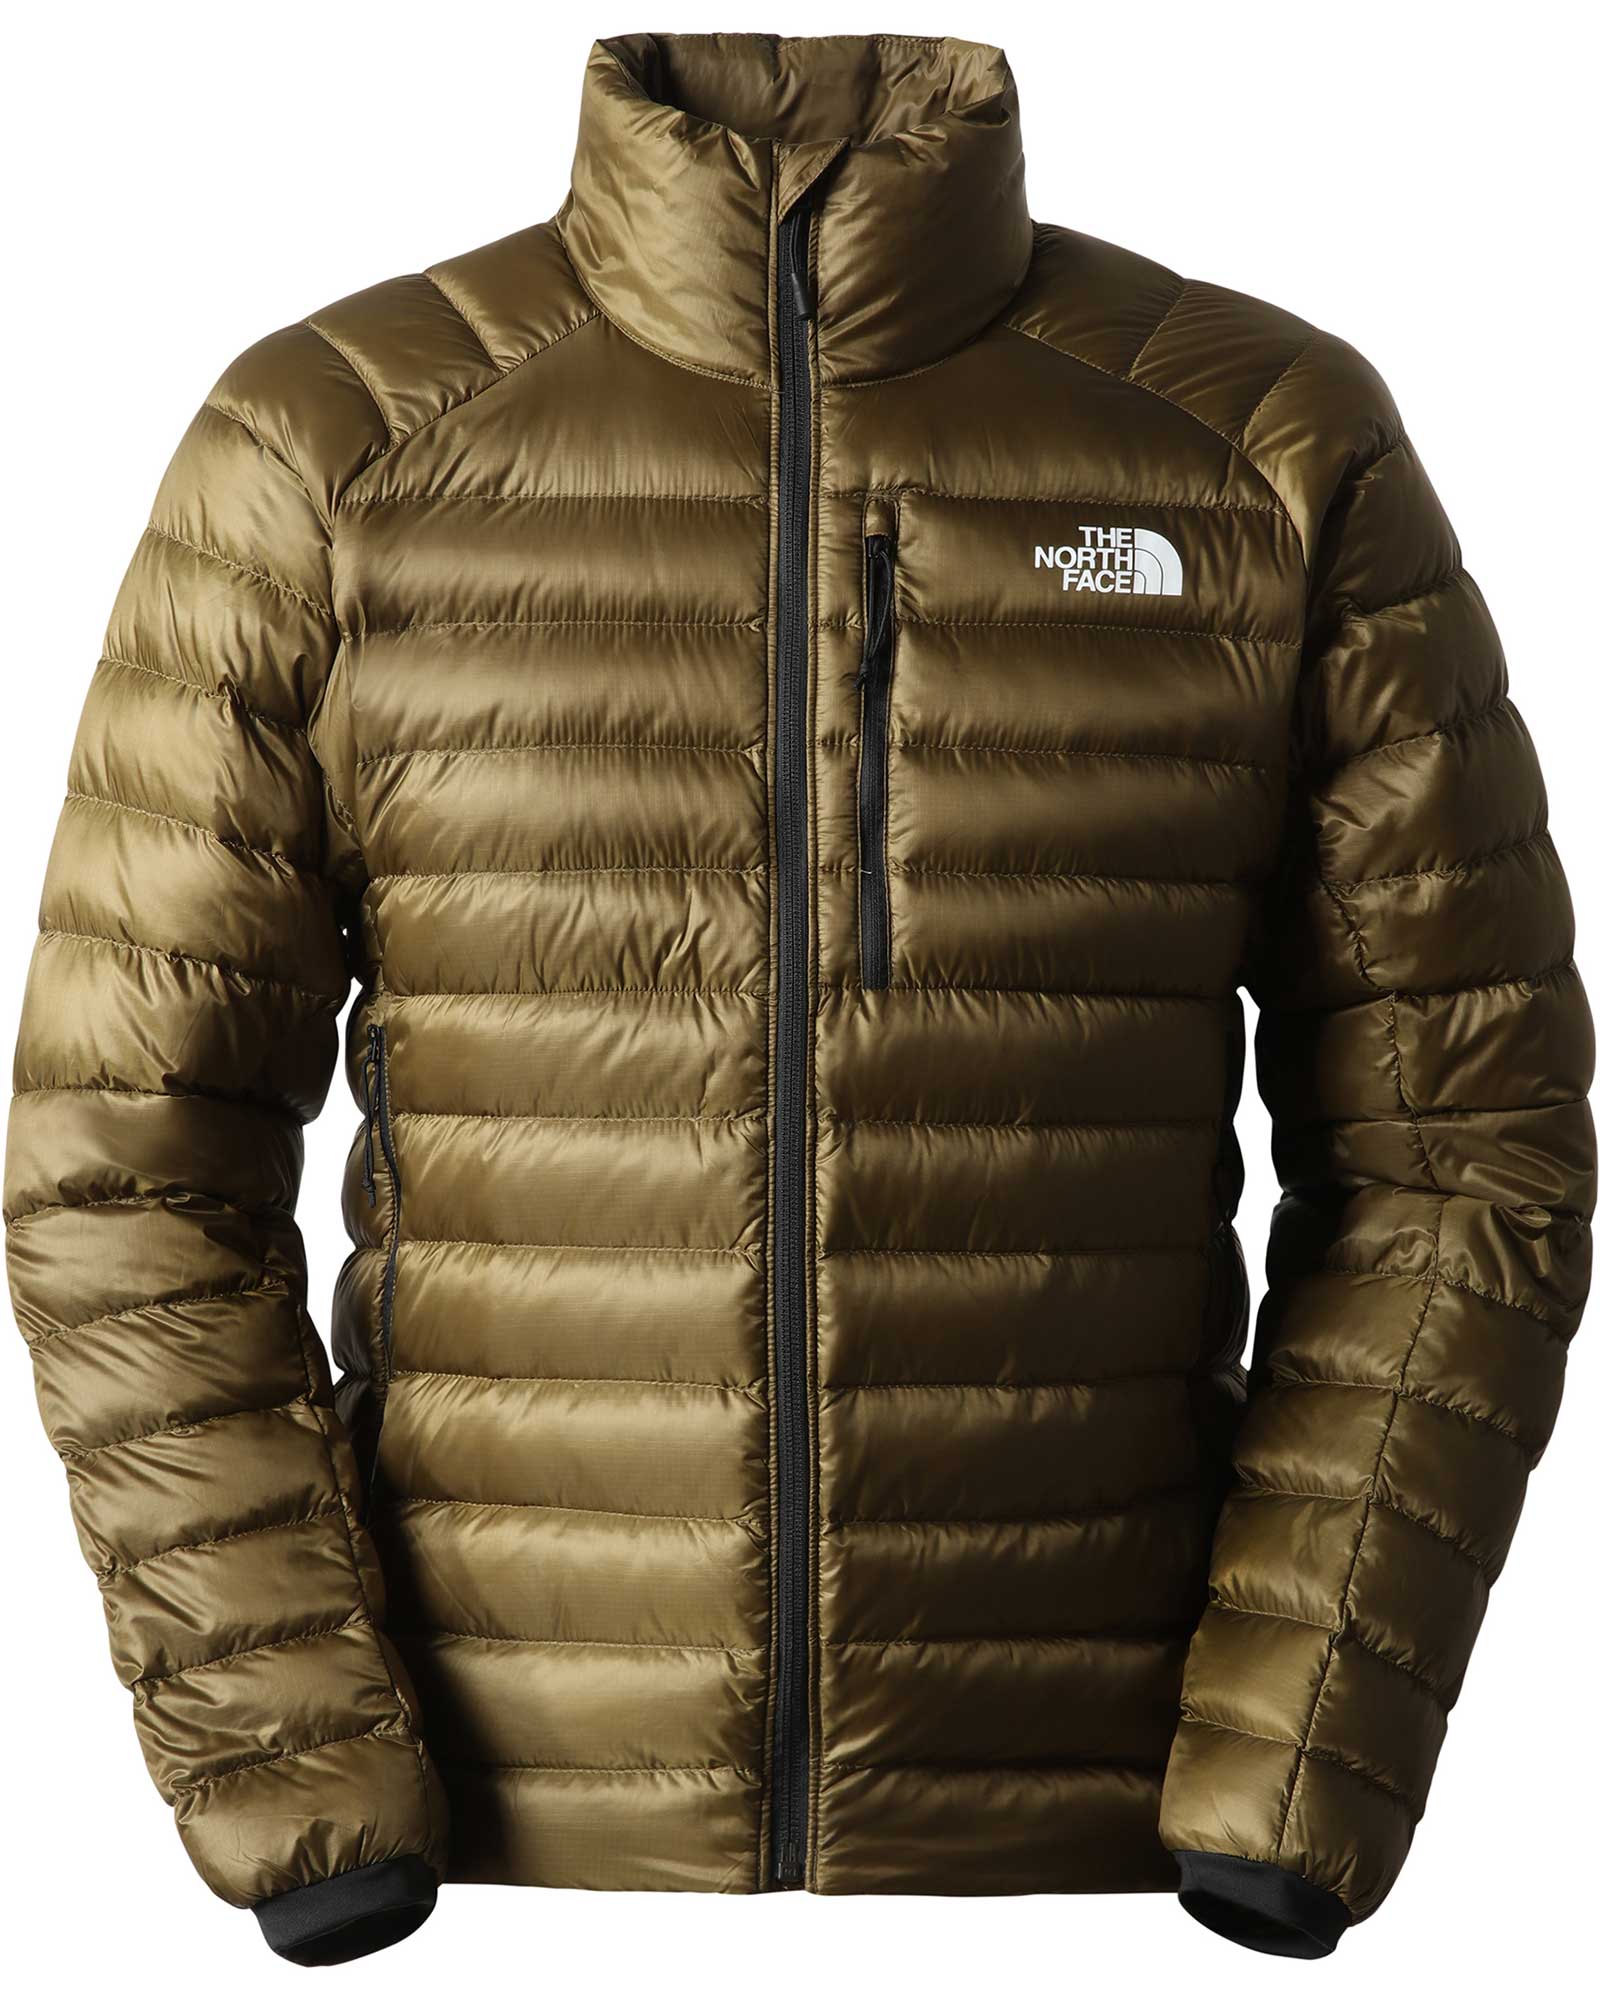 The North Face Summit Breithorn Men’s Down Jacket - Military Olive XL